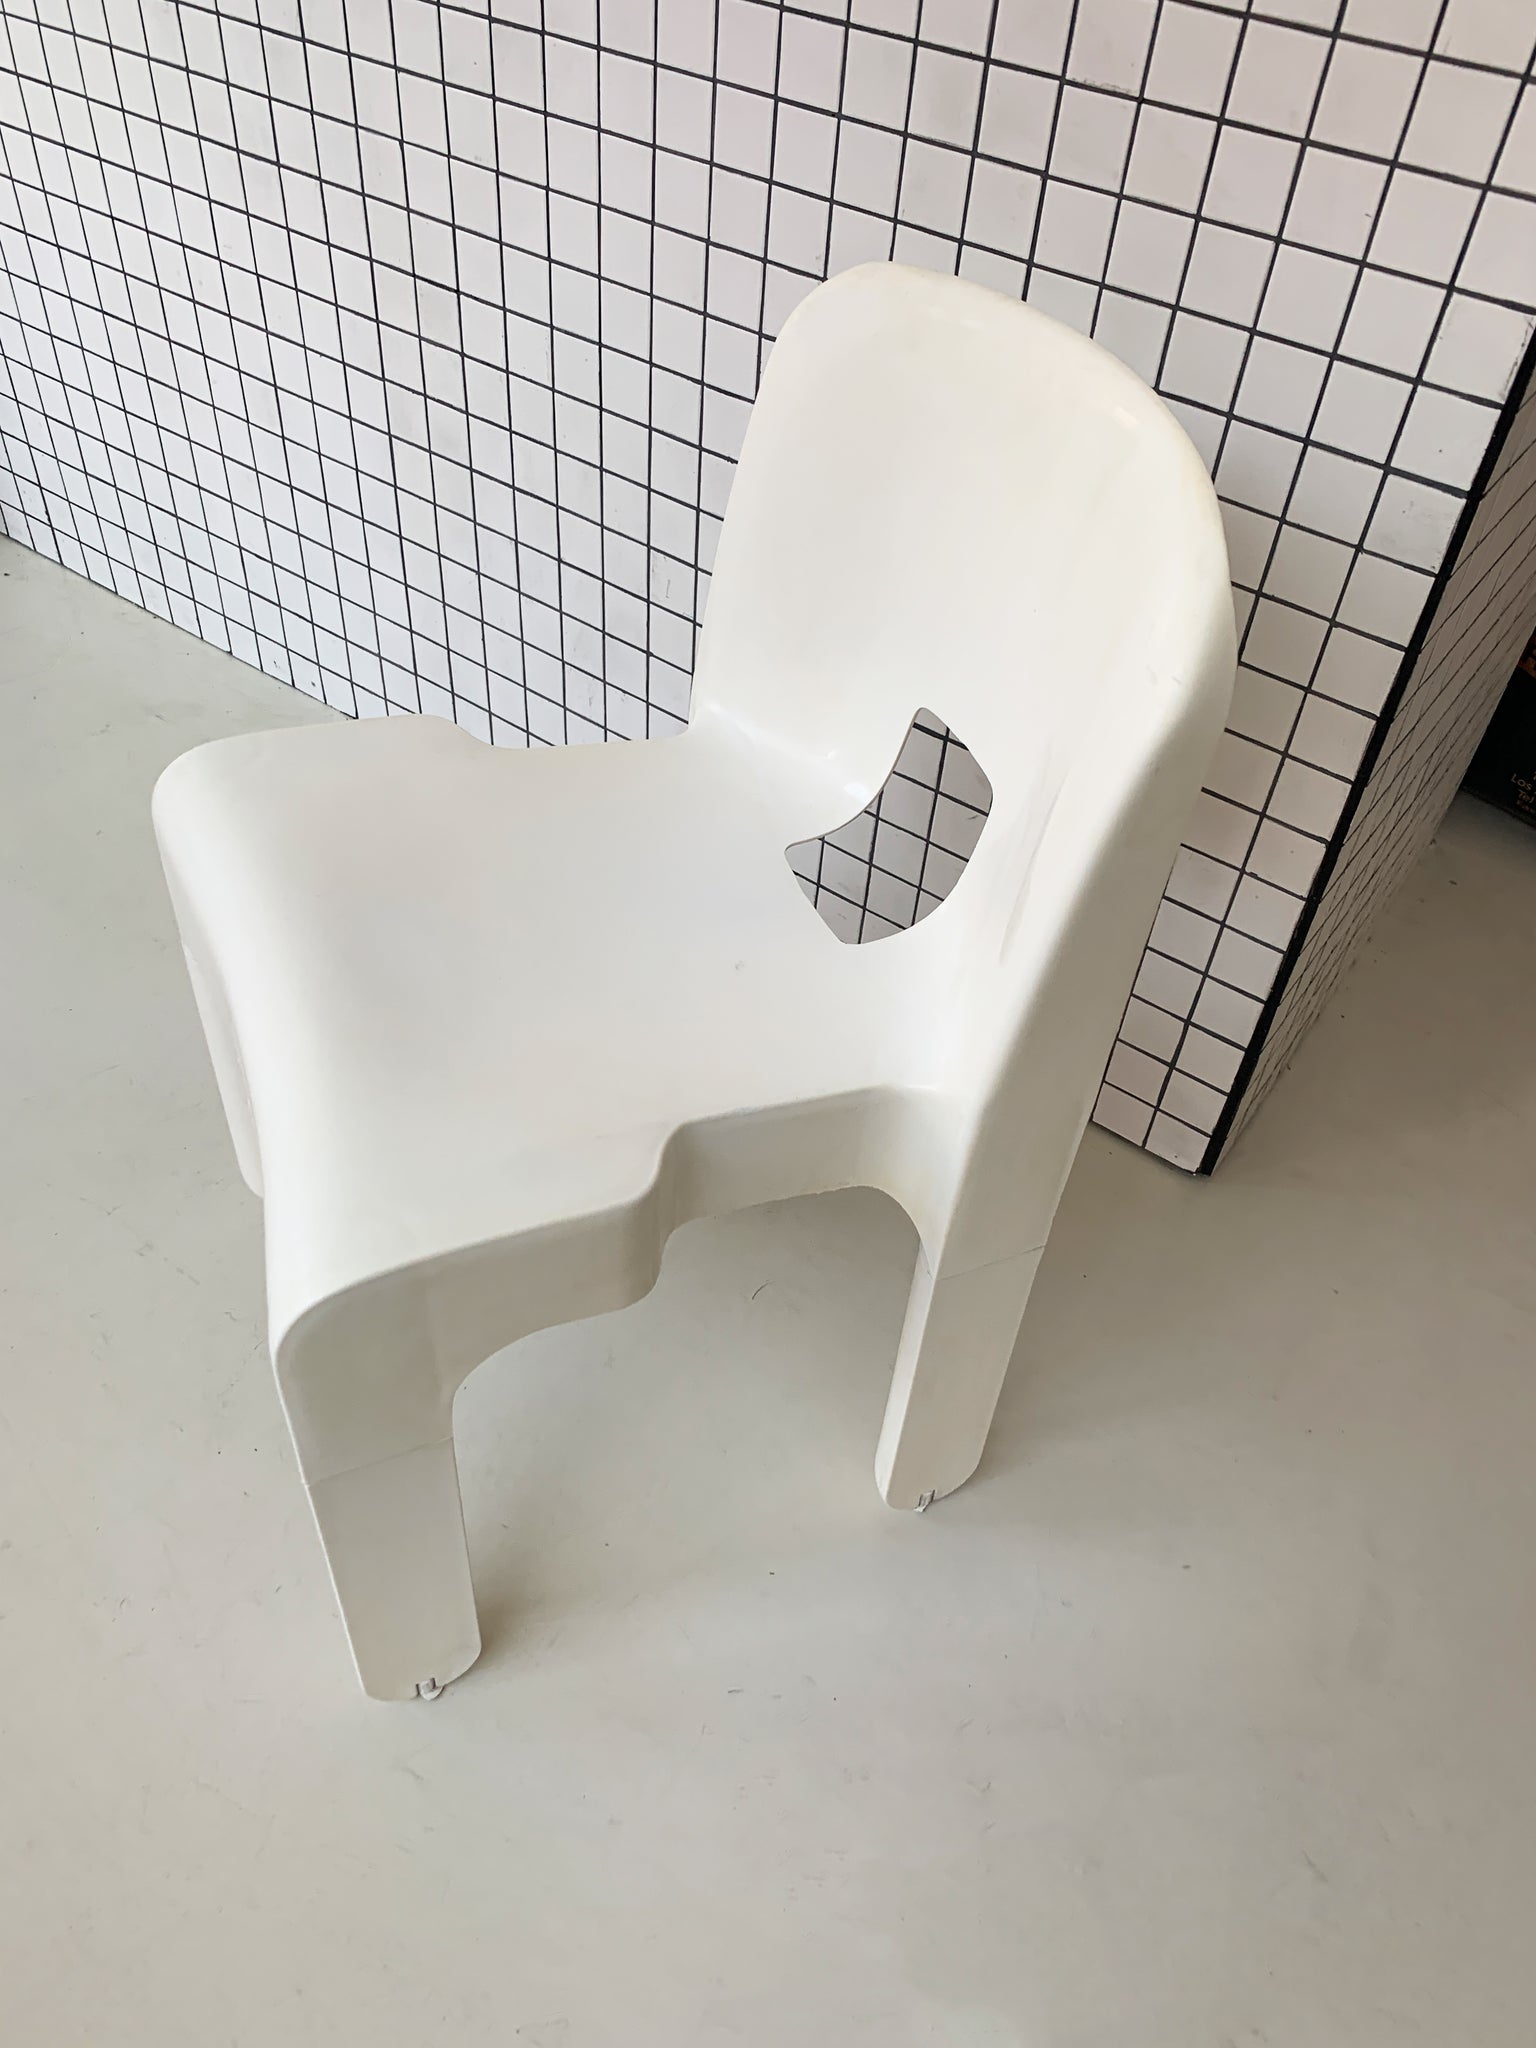 1970s Plastic "Universale" Chair by Joe Colombo for Kartell